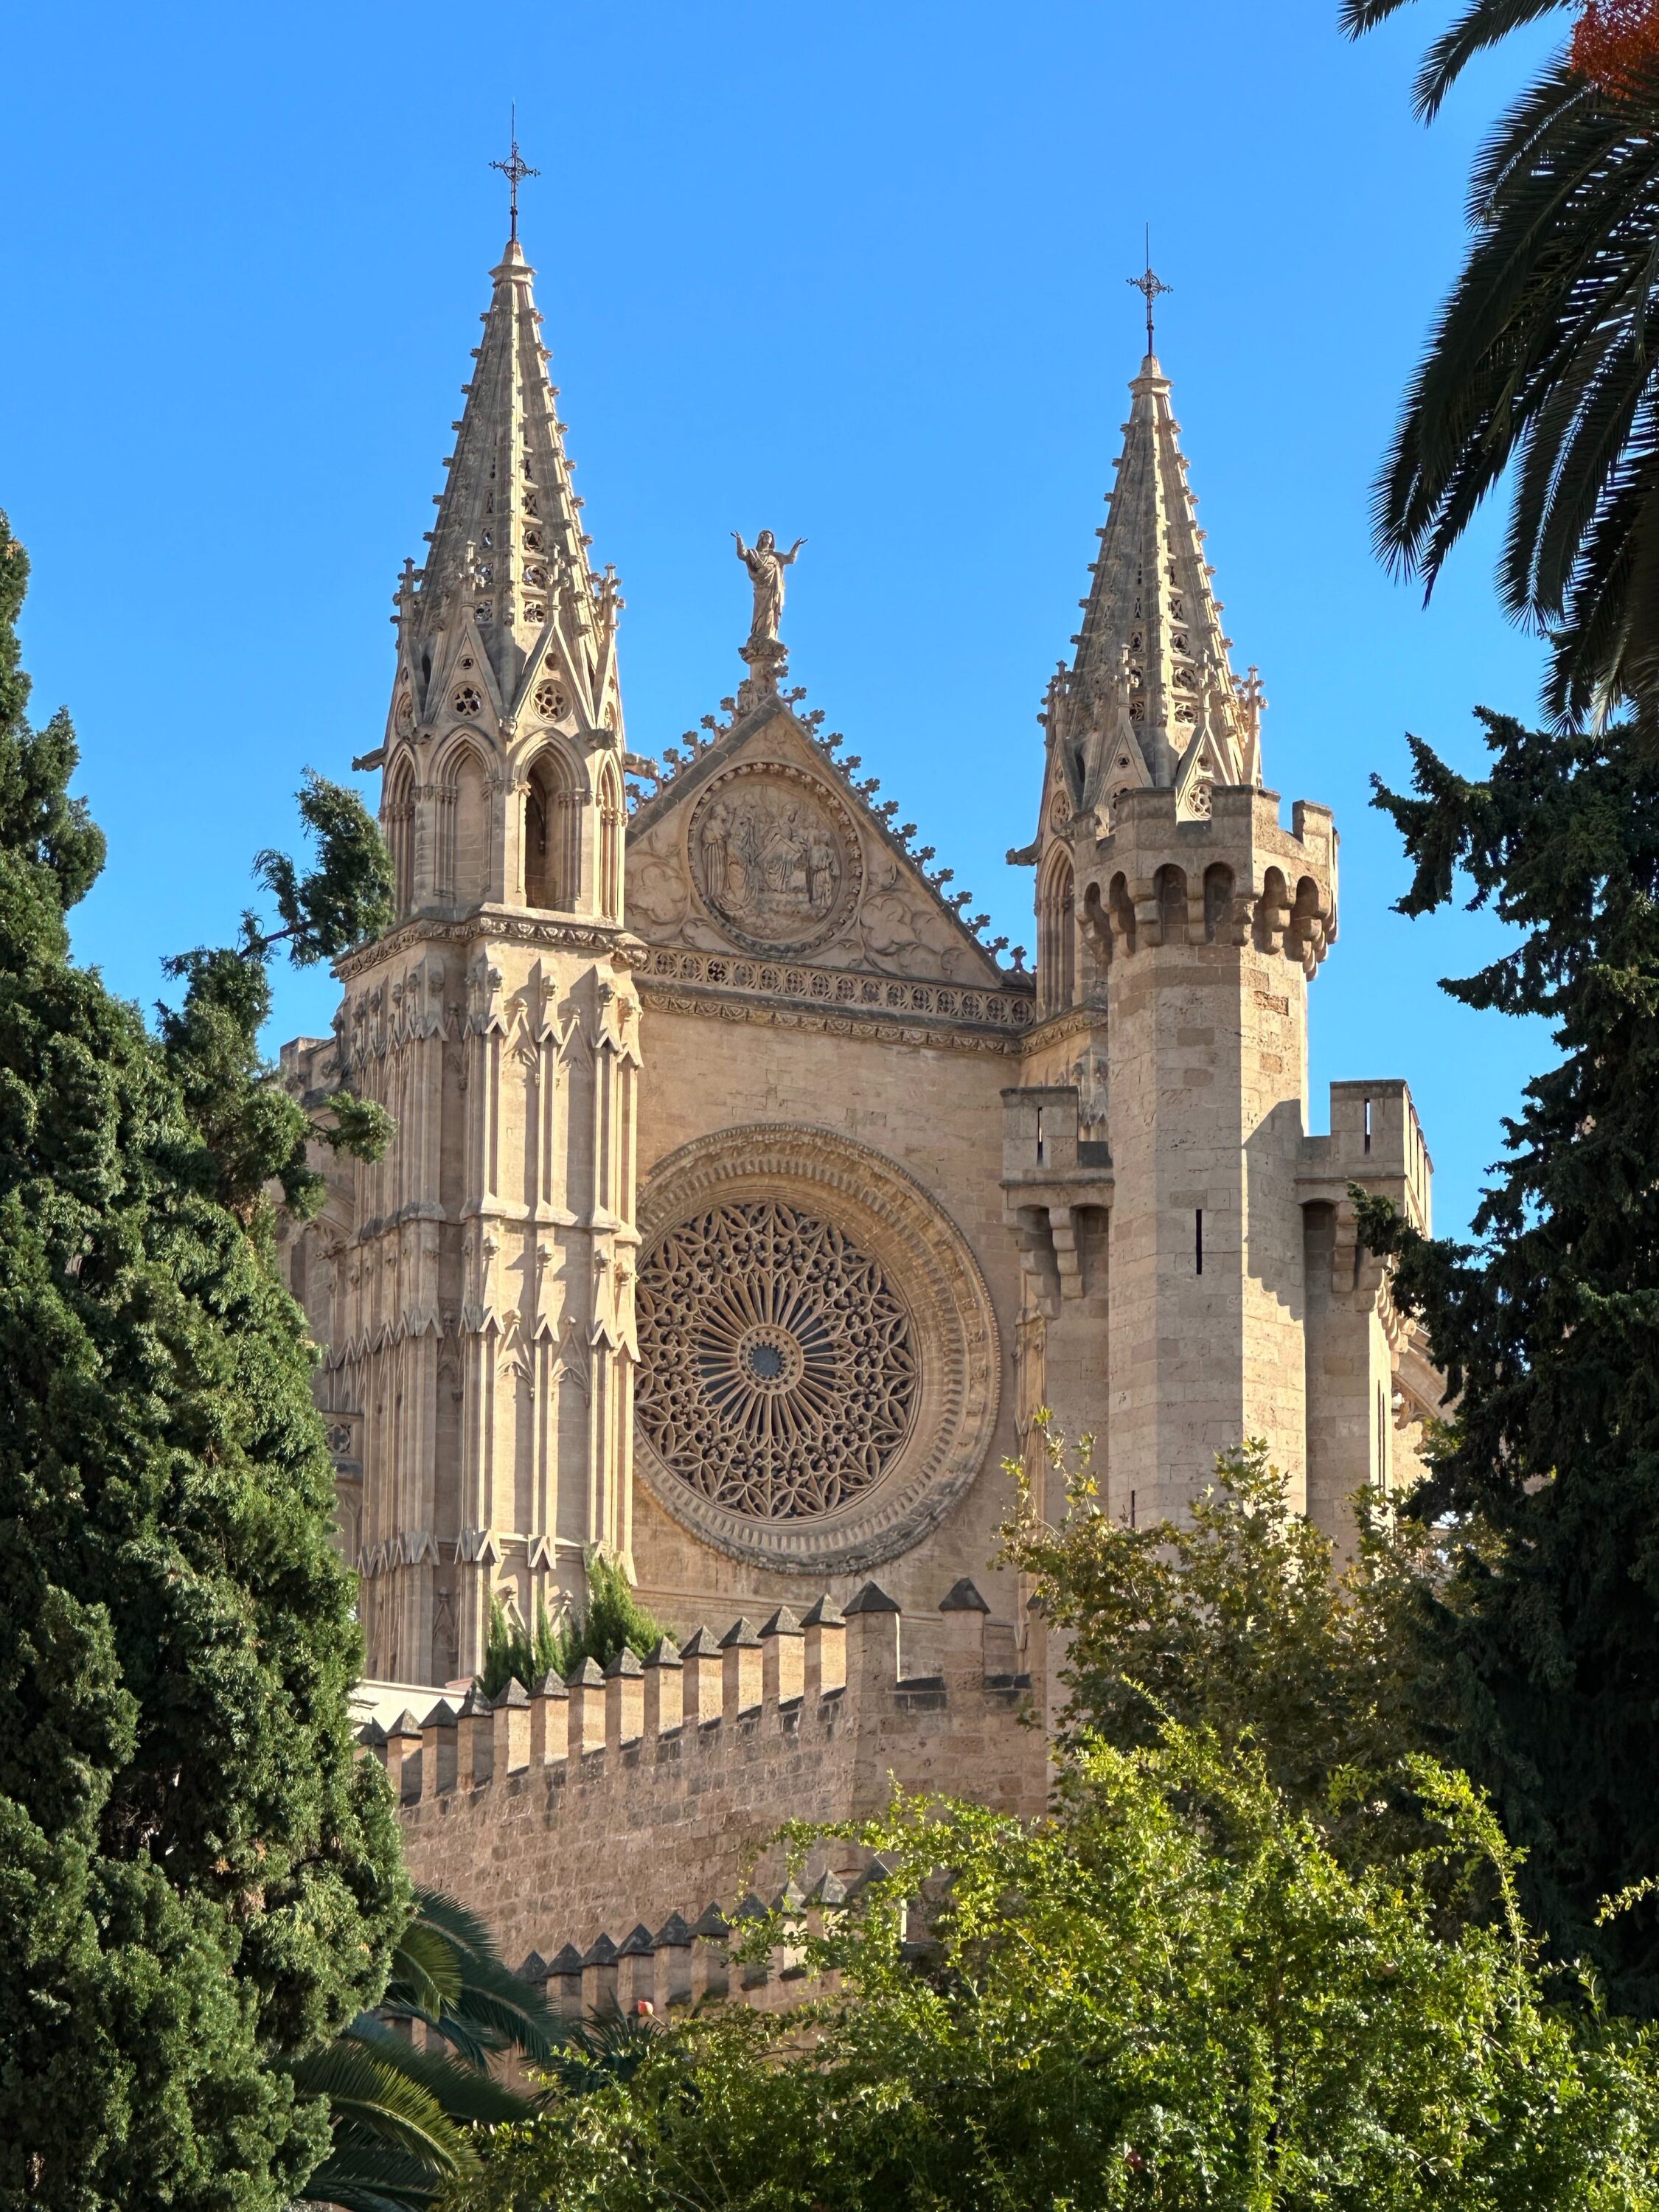 An ornate cathedral surrounded by trees.